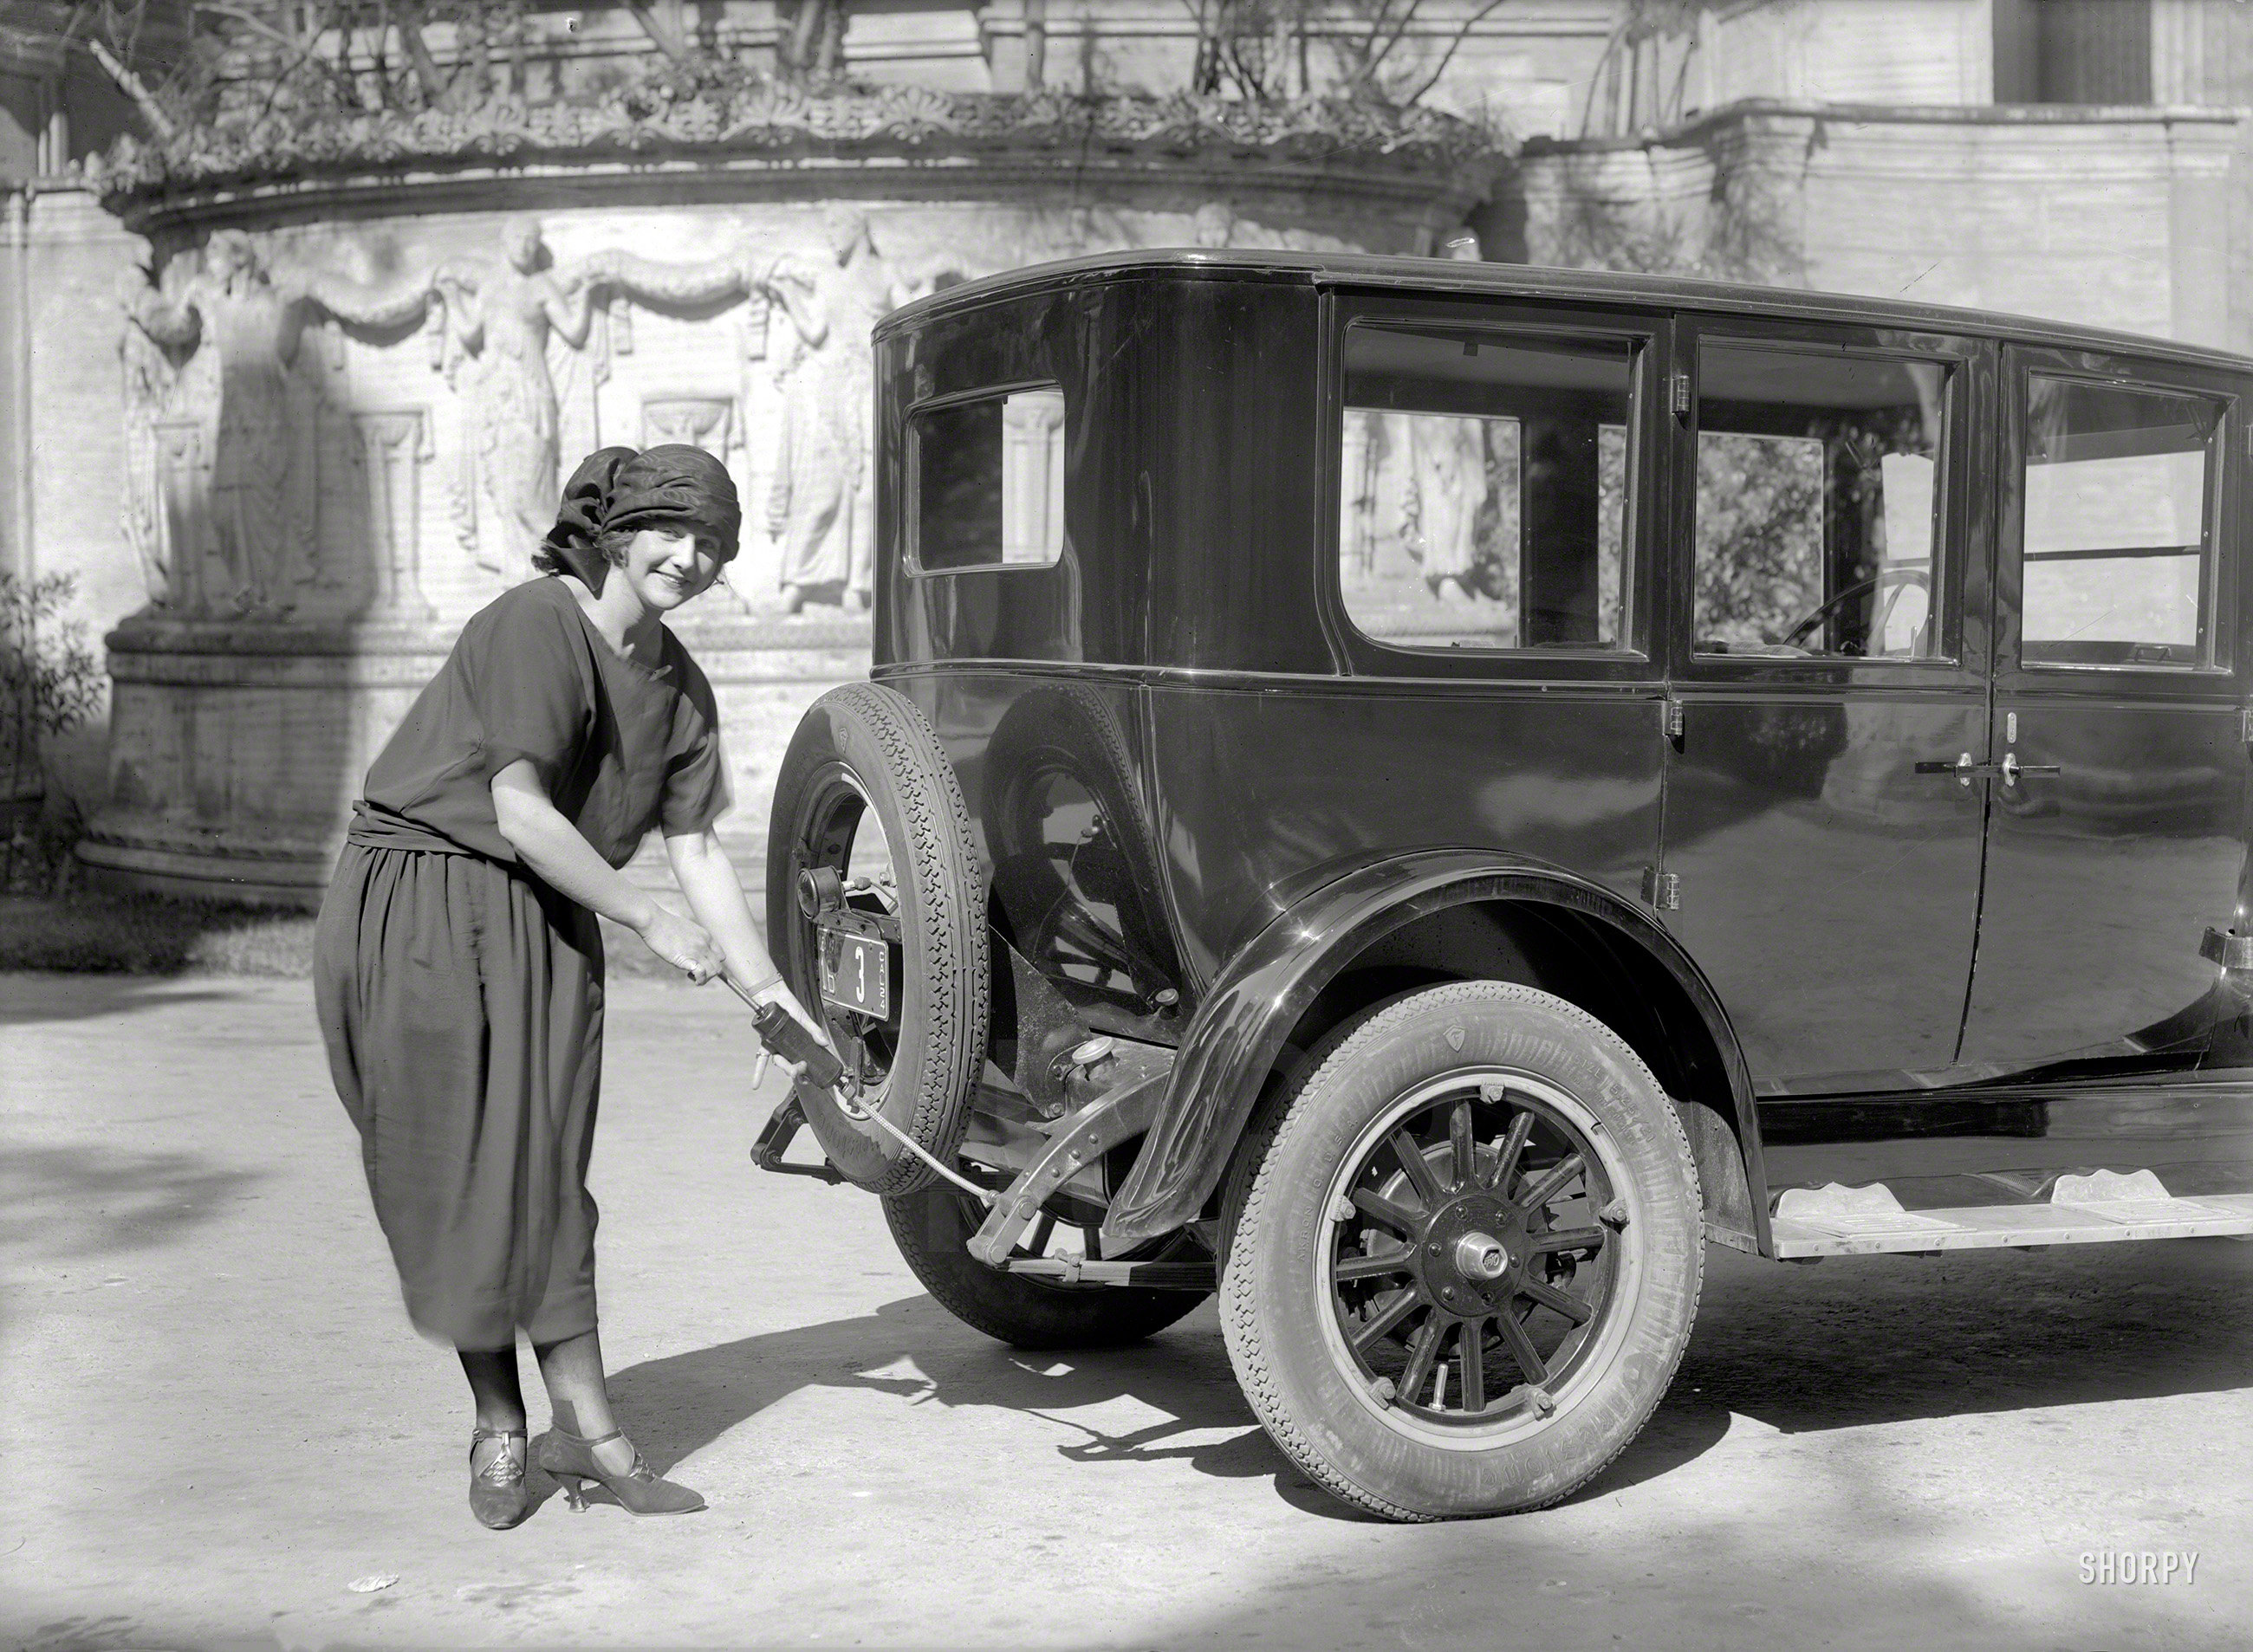 San Francisco, 1924. "Lady greasing Oldsmobile sedan." A pioneer of Women's Lubrication. 5x7 glass negative by Christopher Helin. View full size.